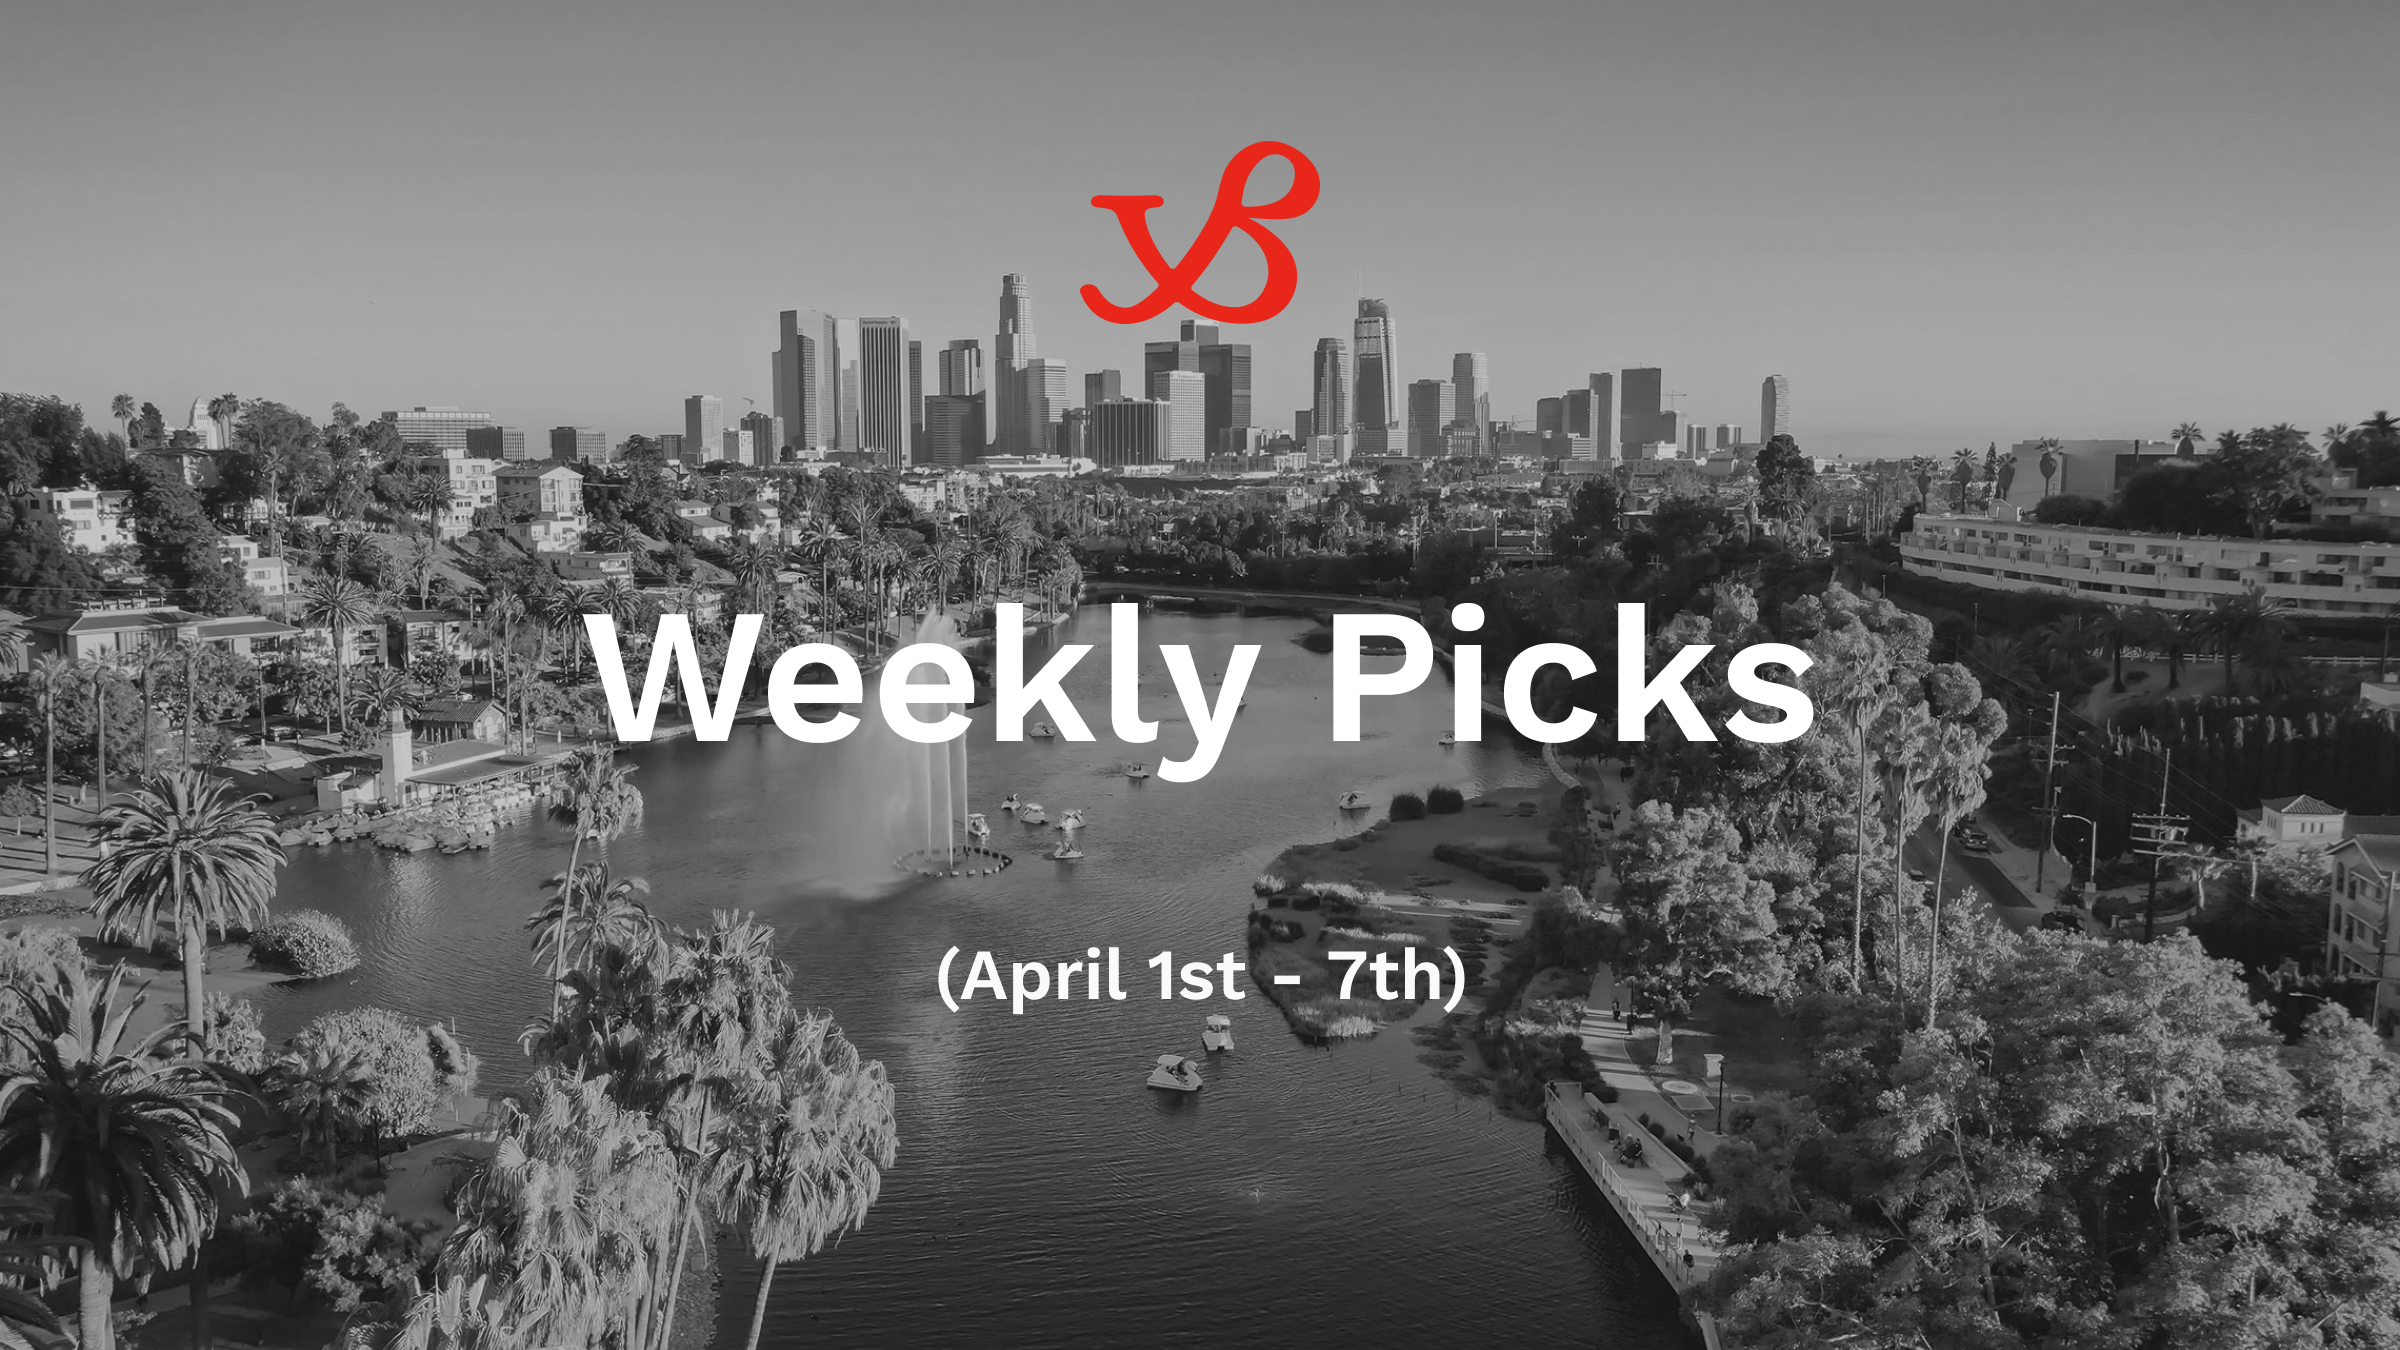 Buffet's Weekly Picks cover